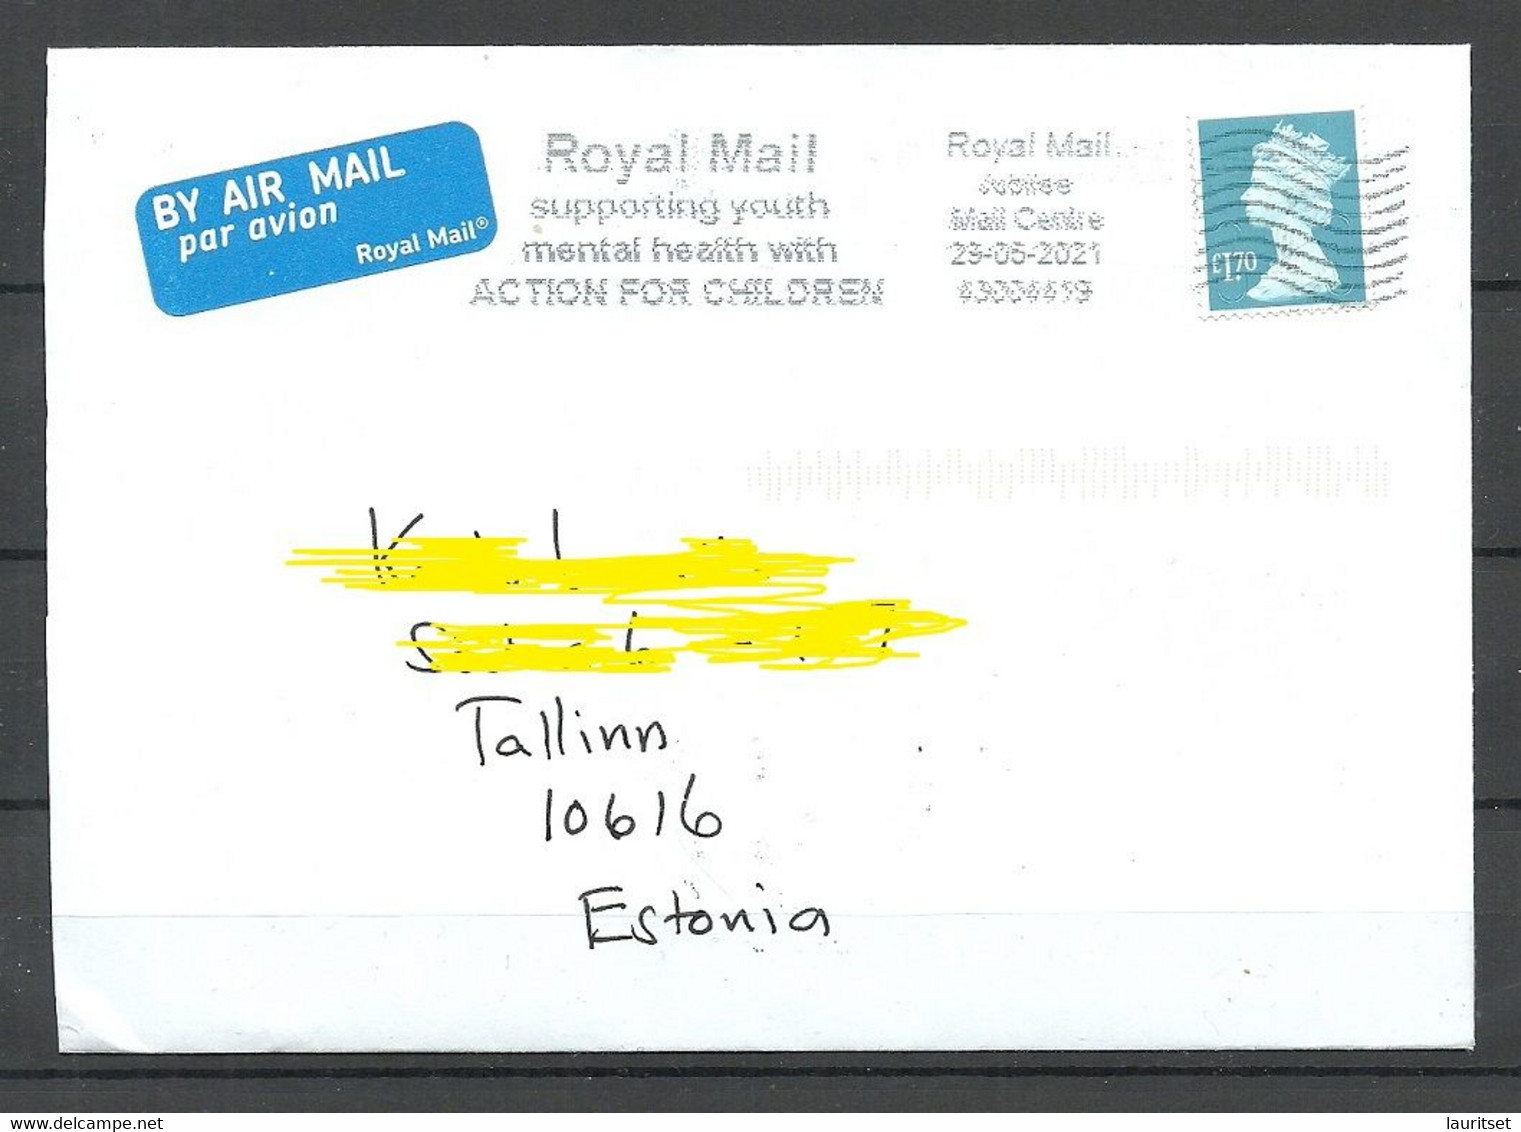 GREAT BRITAIN 2021 Air Mail Cover To Estonia With "Youth Mental Health" Cachet & Queen Elizabeth II 1,70 Stamp As Single - Covers & Documents